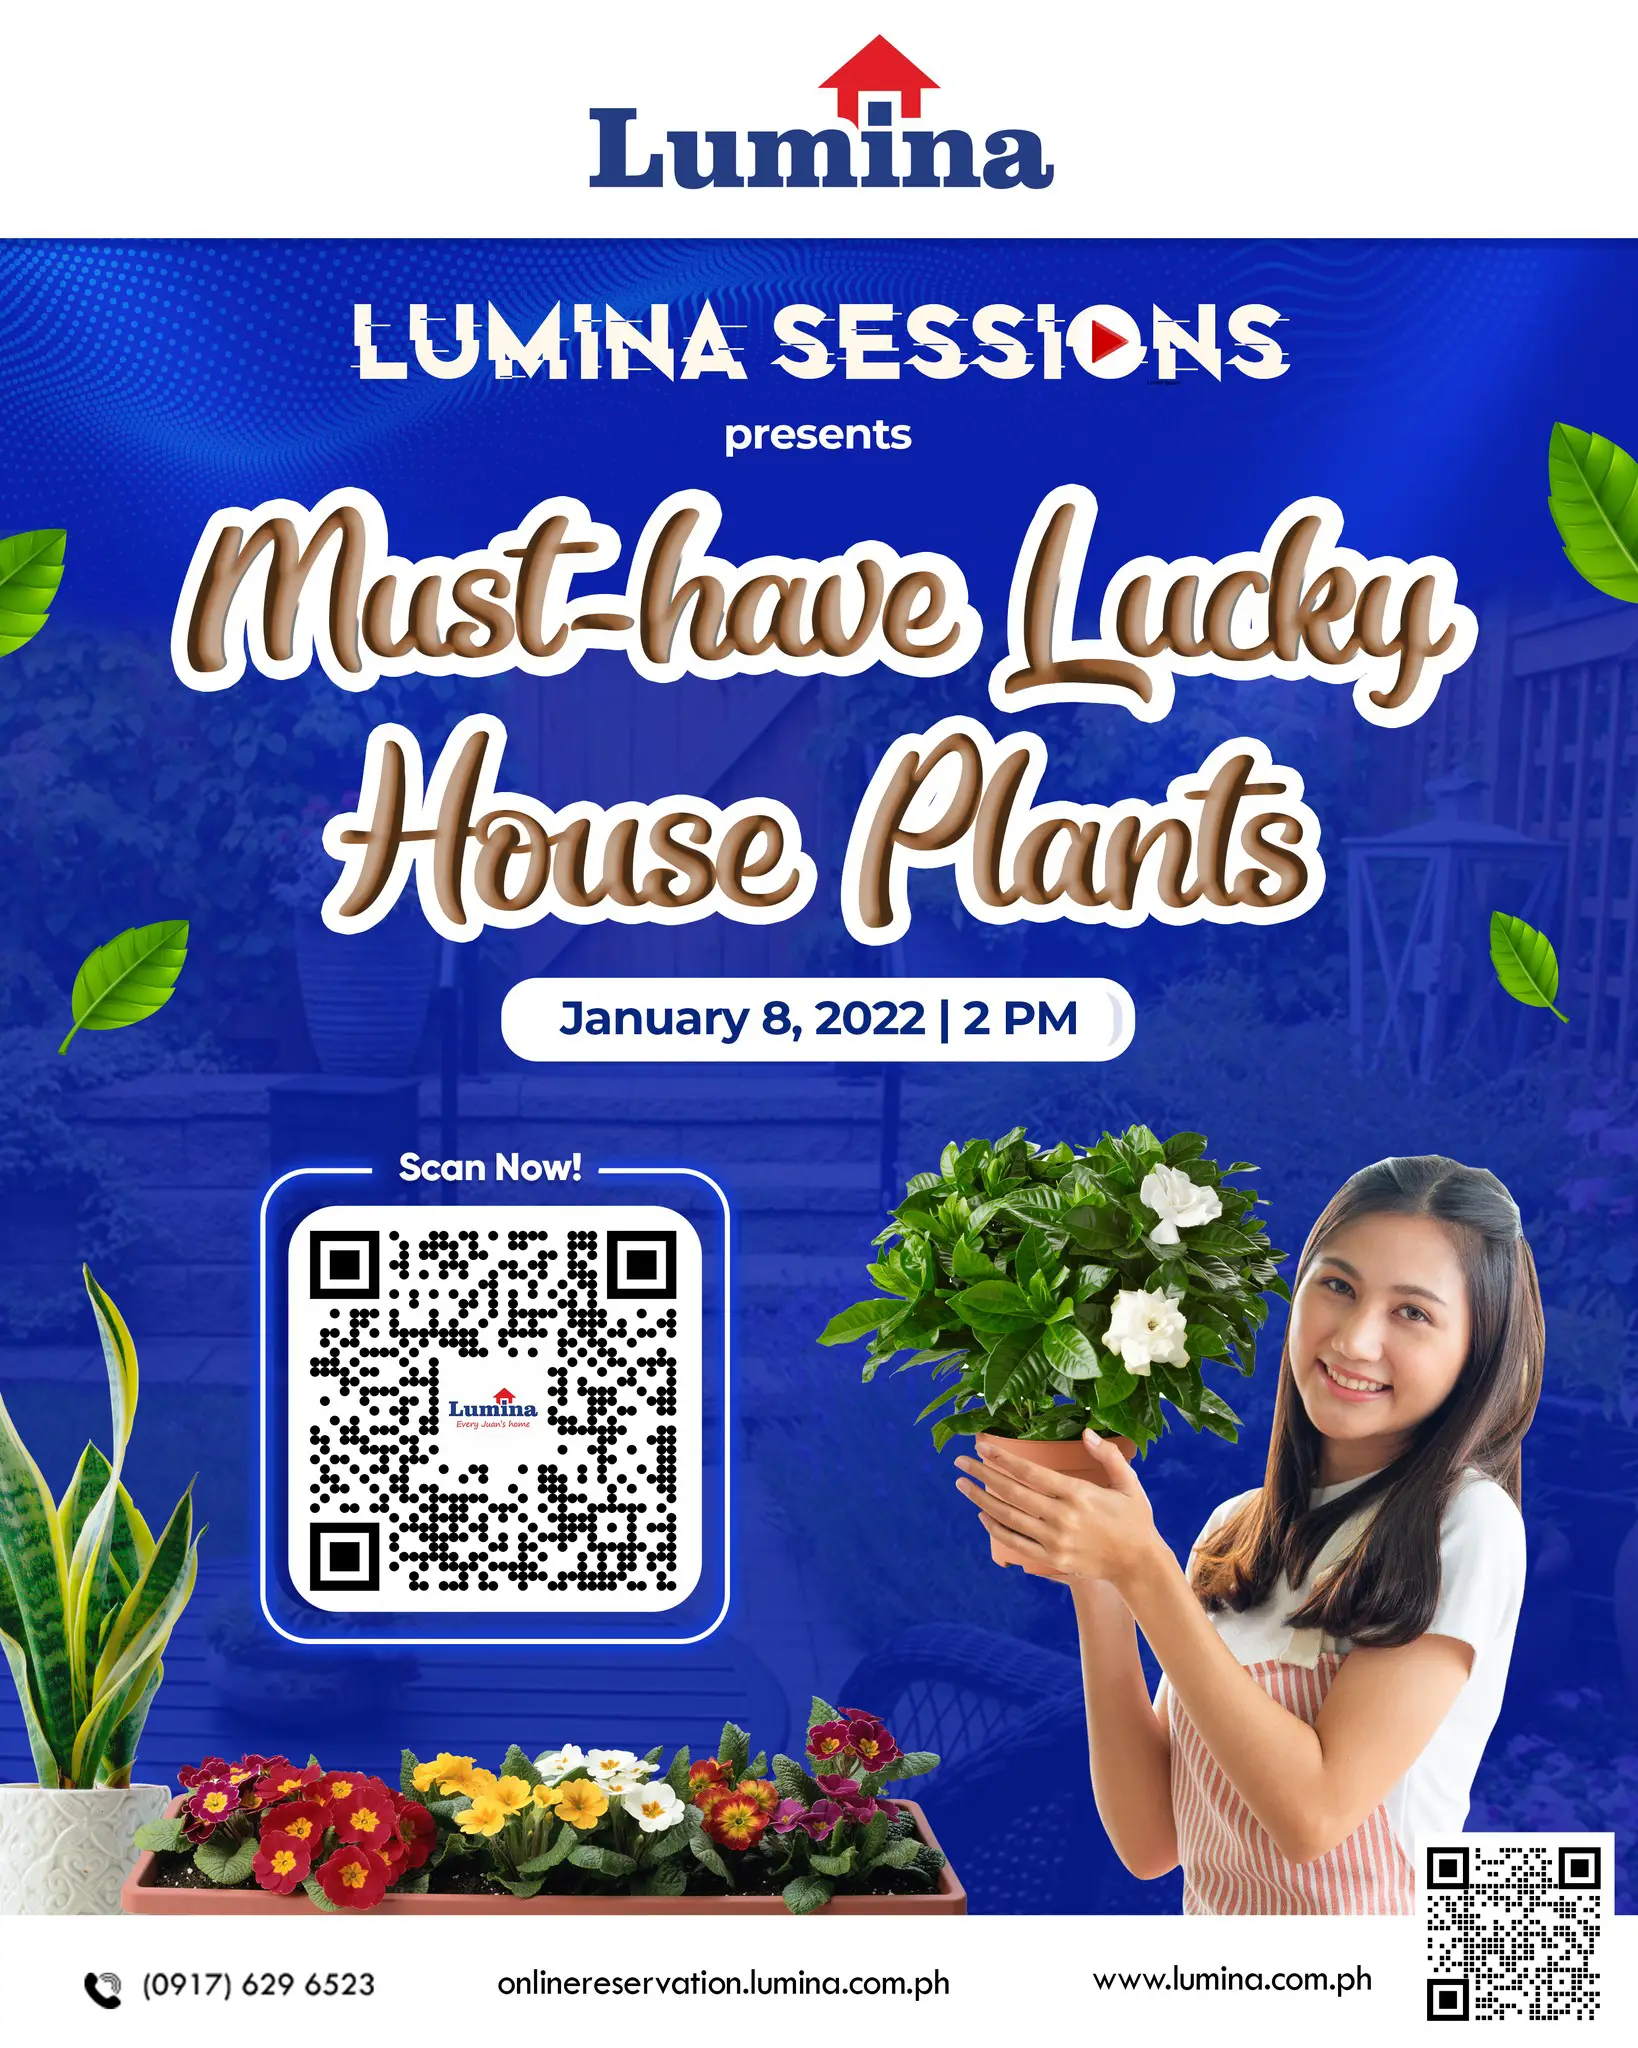 lumina sessions must have lucky plants